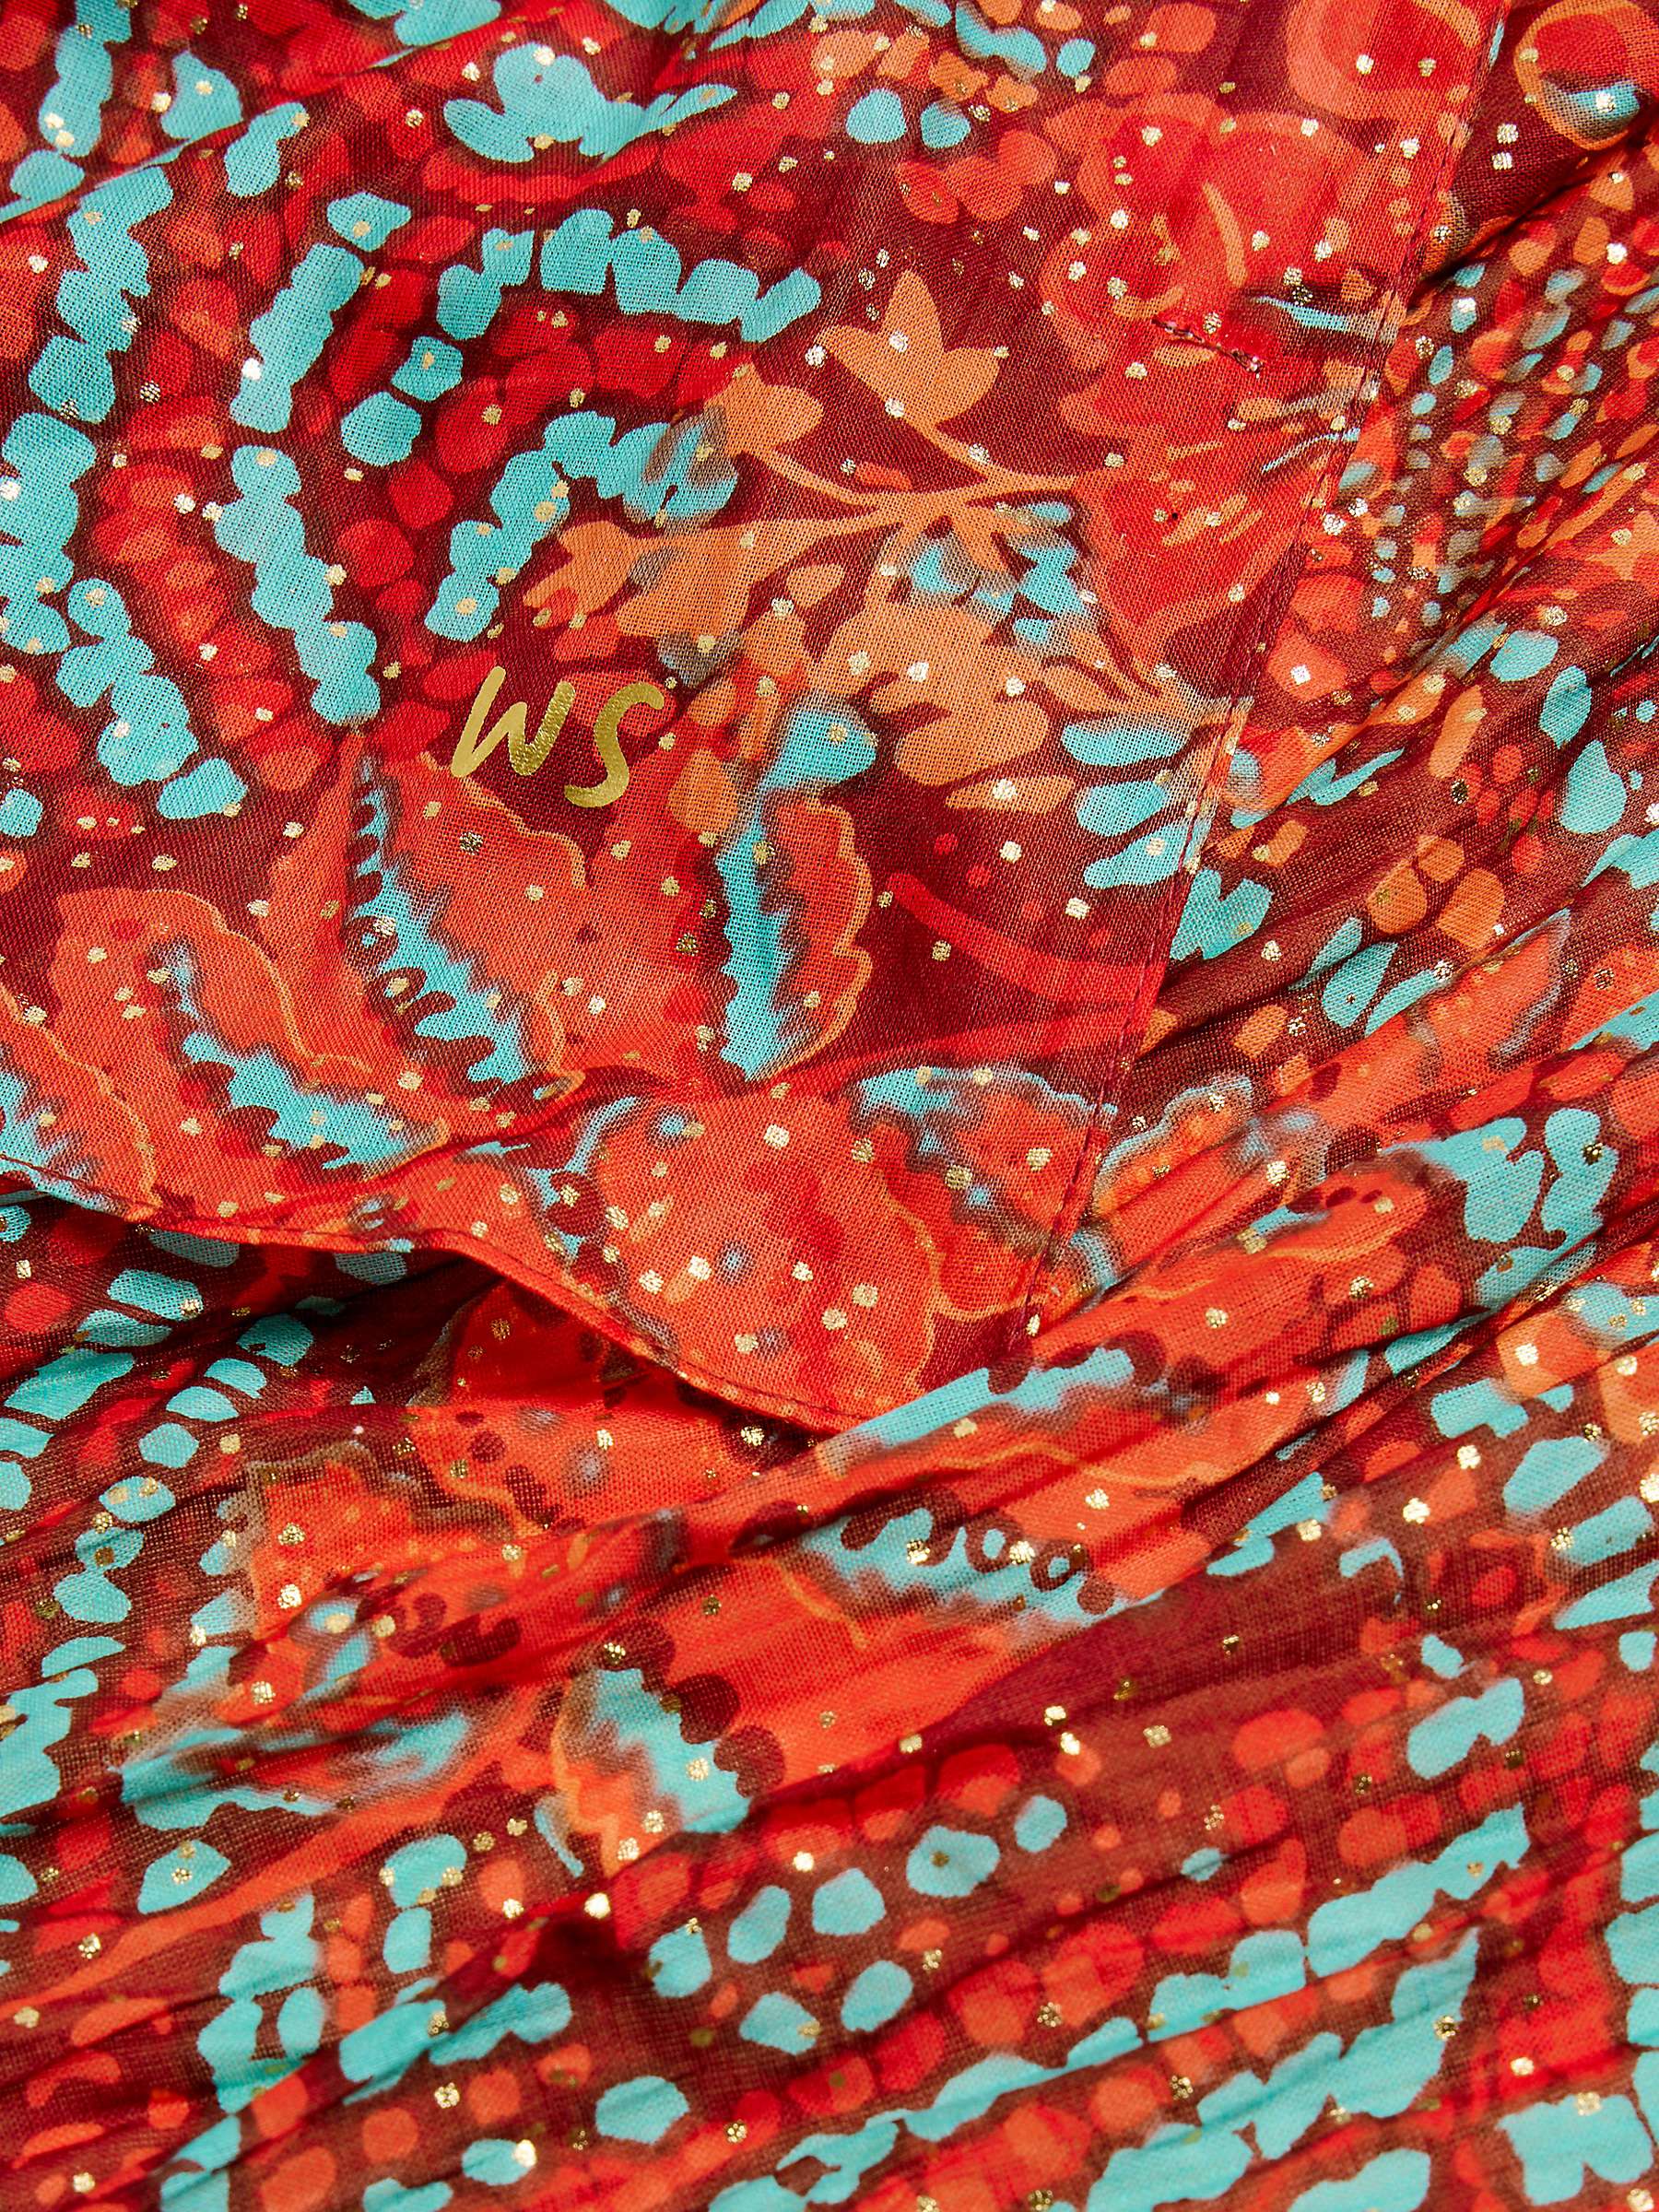 Buy White Stuff Abstract Print Cotton Scarf, Red/Multi Online at johnlewis.com